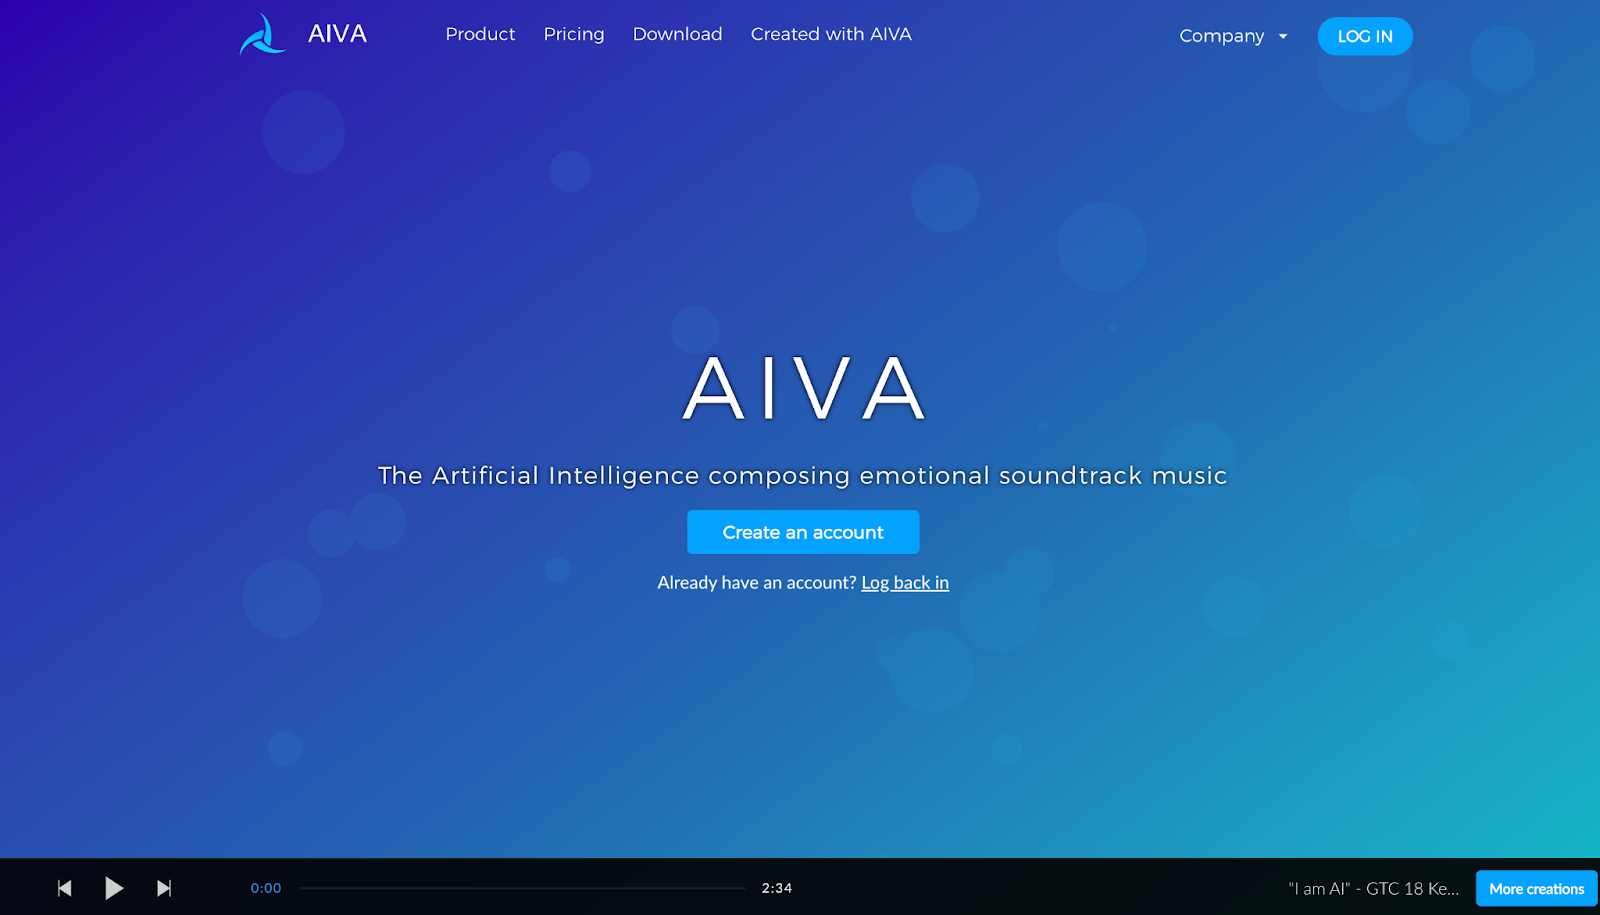 Aiva is one of the best AI music production and creation tools